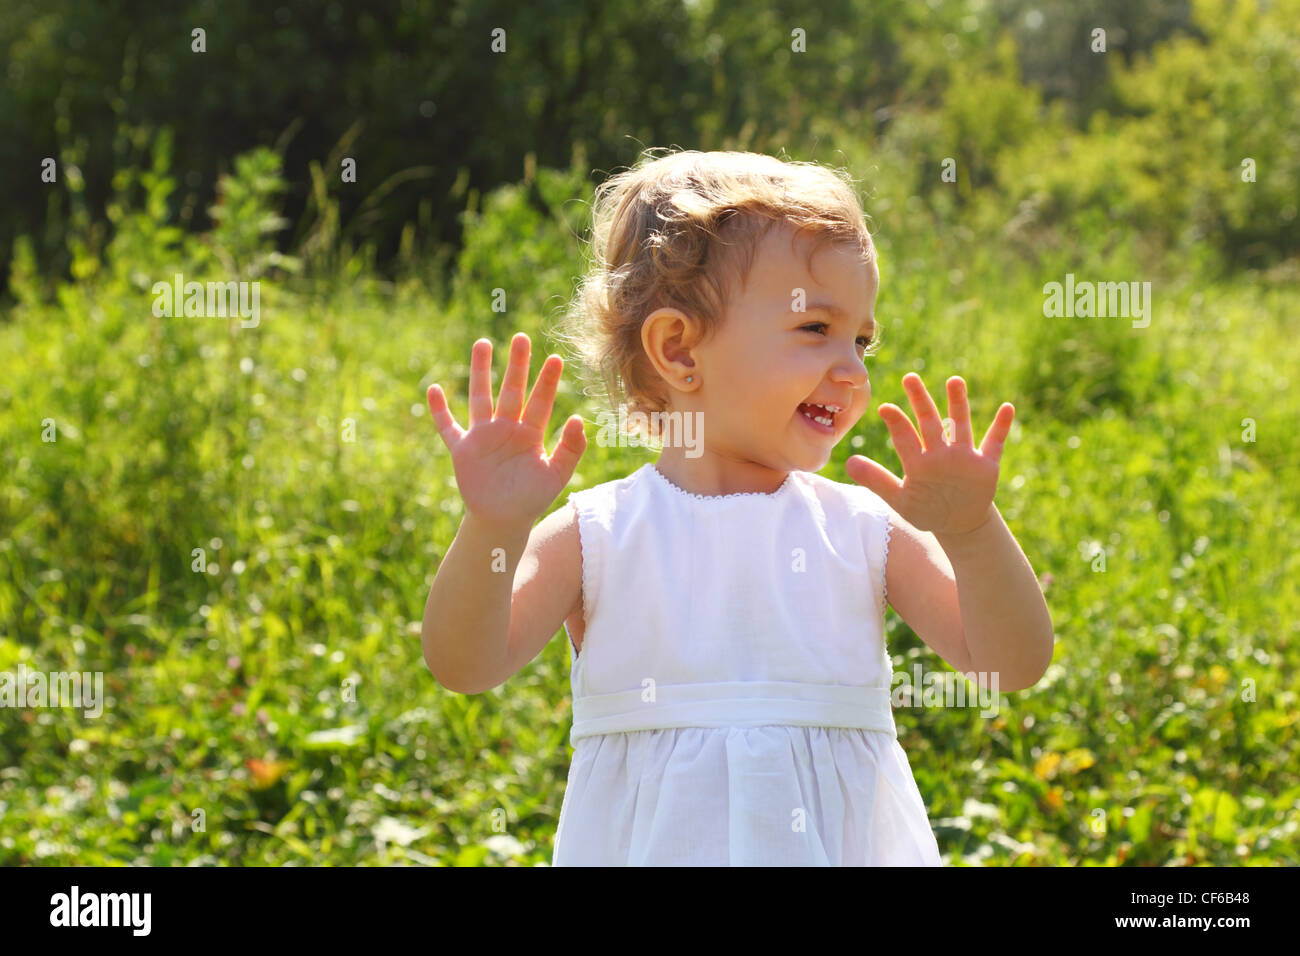 Laughing little girl standing in the grass Stock Photo